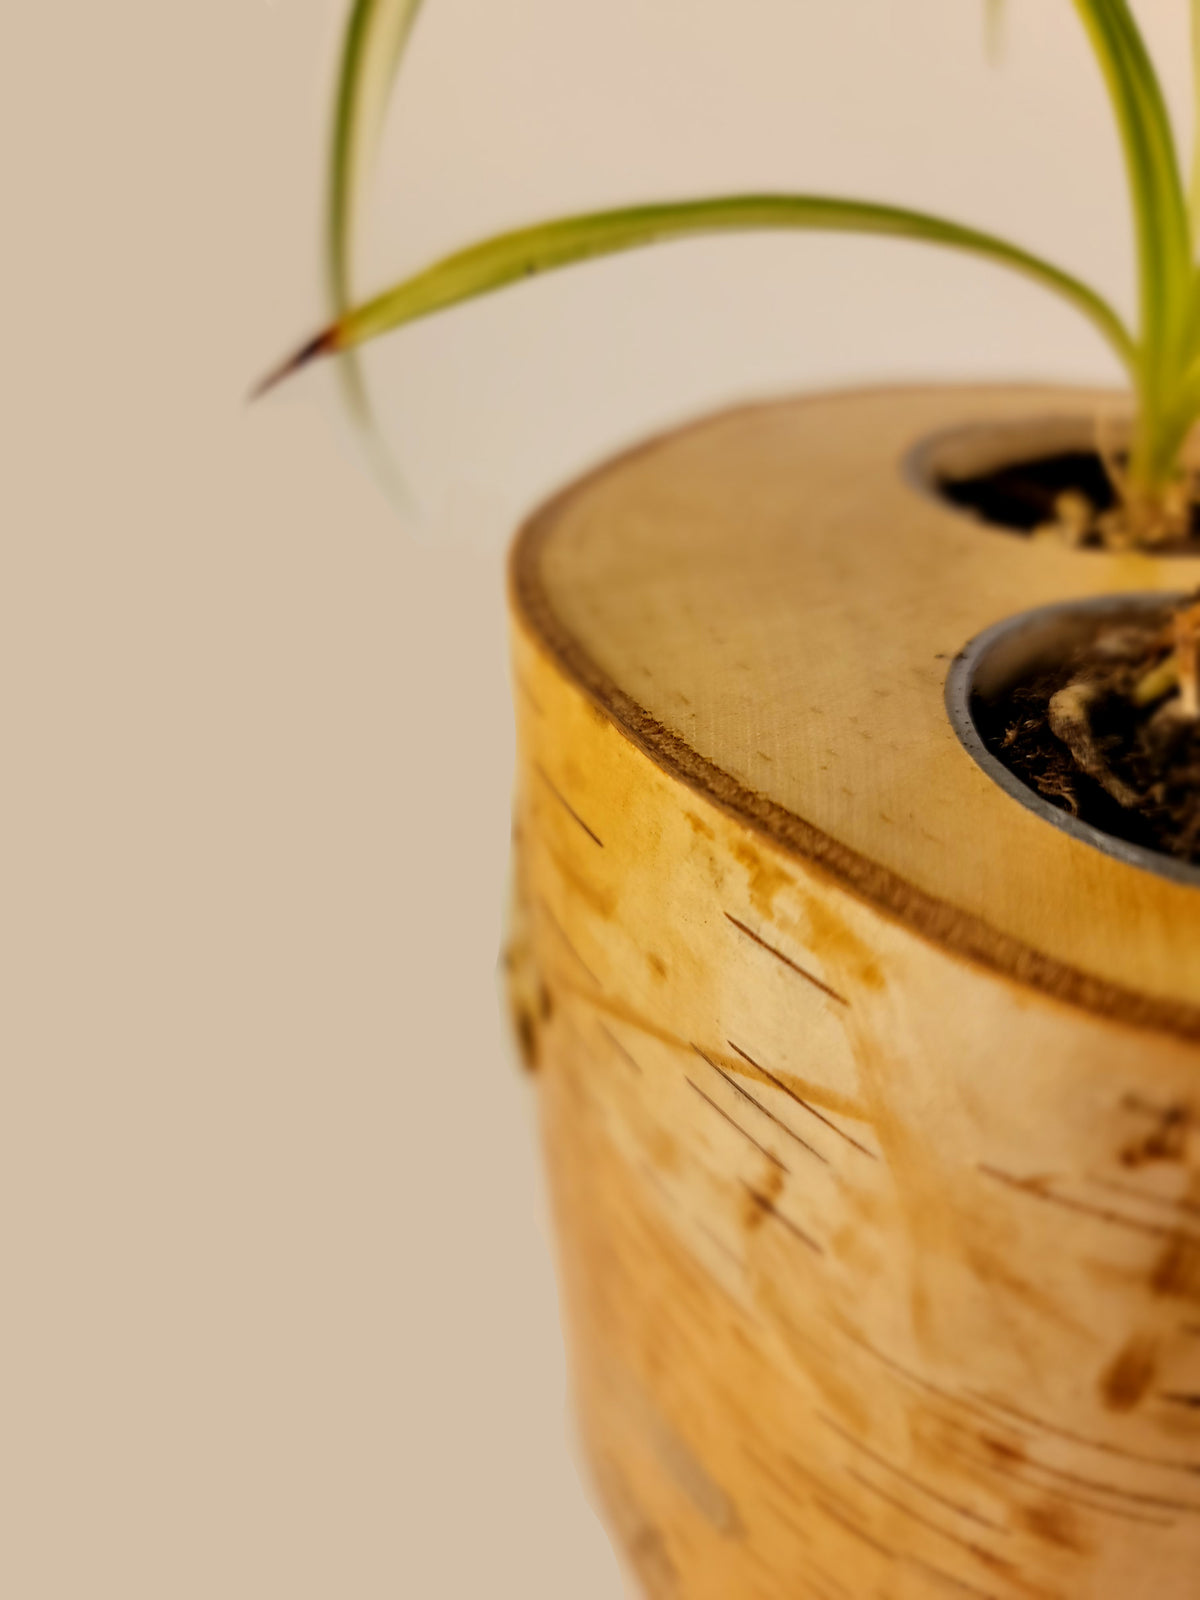 Natural Birch Wood Planter with Greenery, Close Up